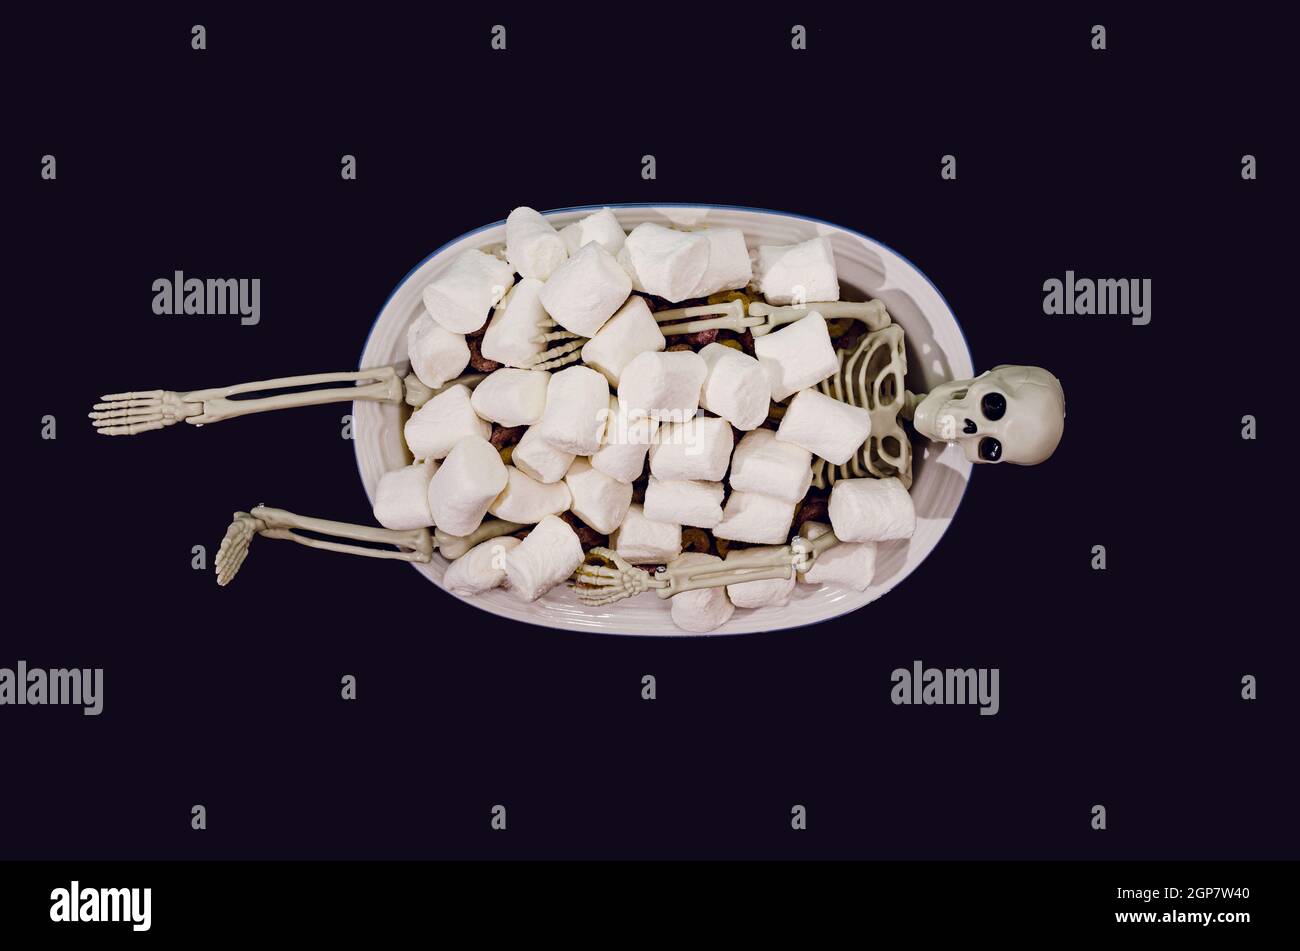 A sceleton taking a bath in a bath tube filled with white marshmallows. Trick or treat Halloween party invitation concept. Funny and spooky artistic d Stock Photo